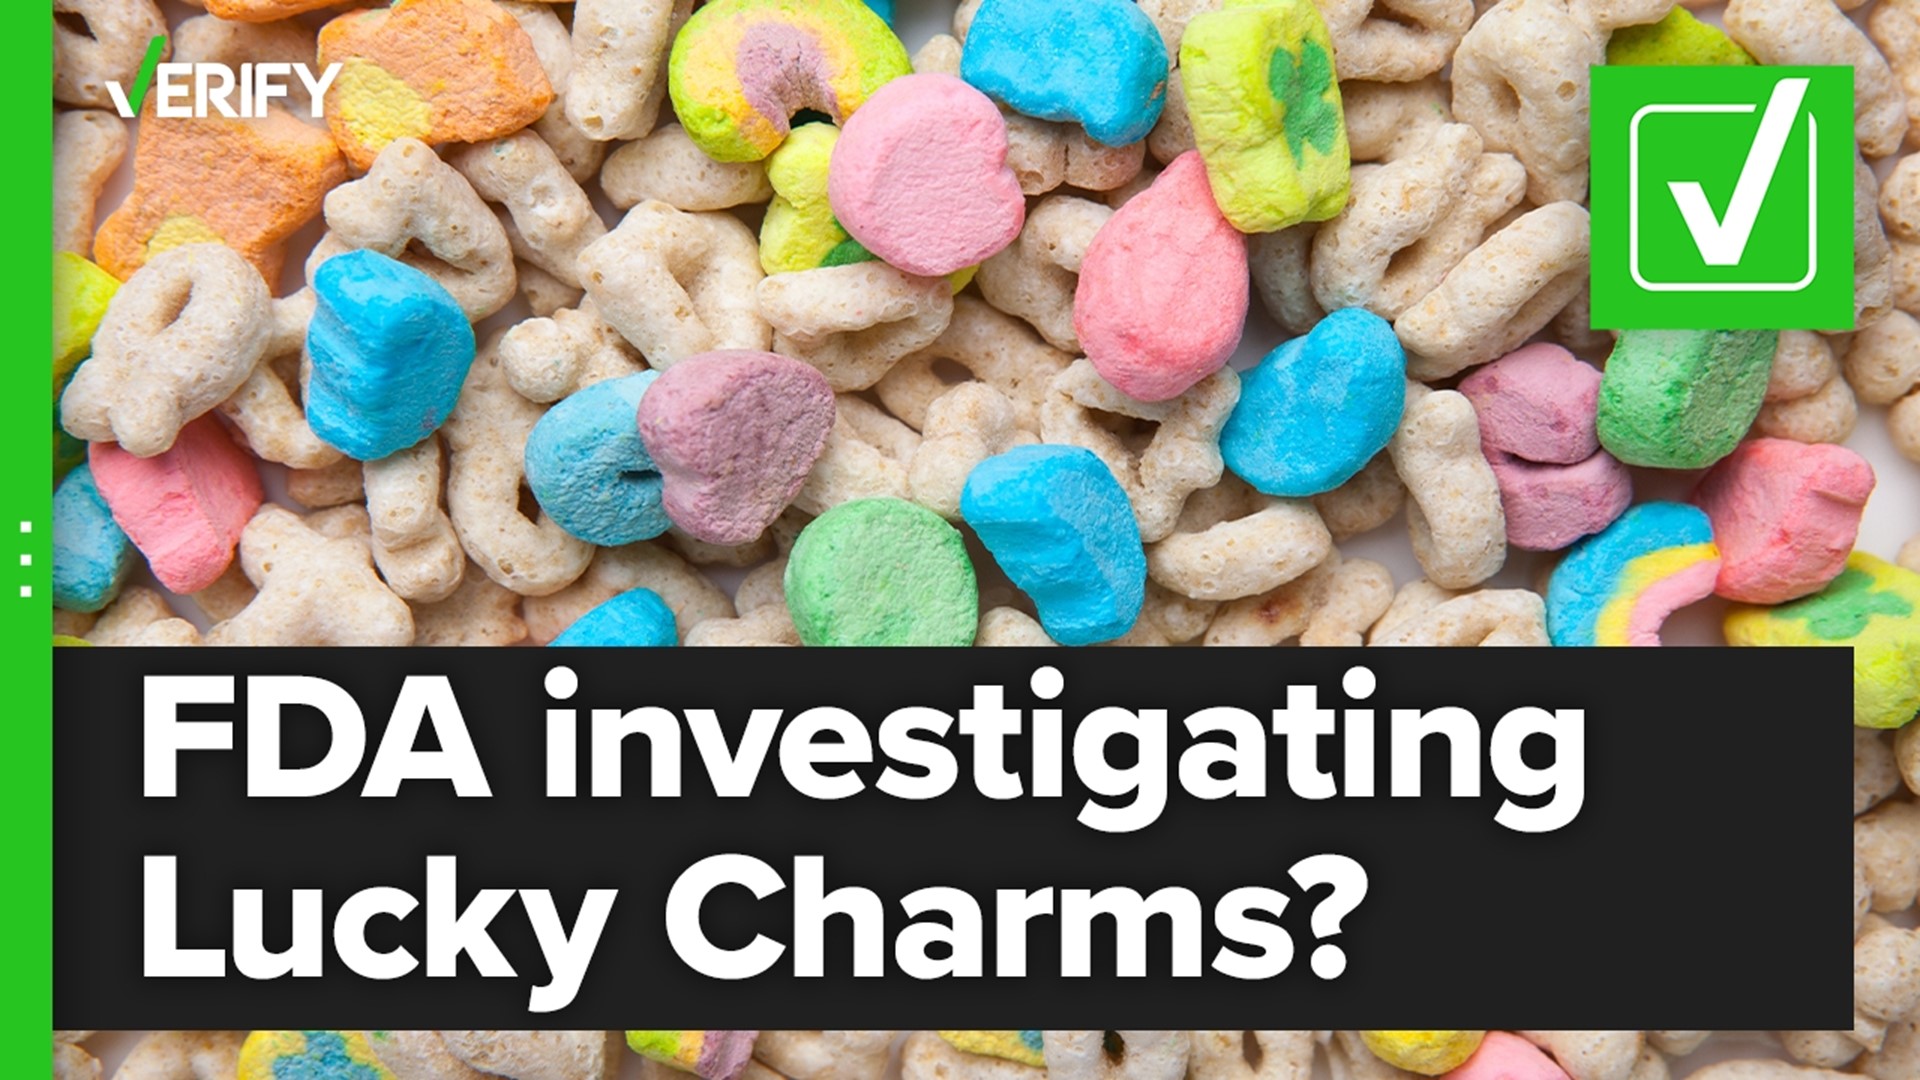 Yes, the FDA investigating claims that Lucky Charms have caused people to  get sick